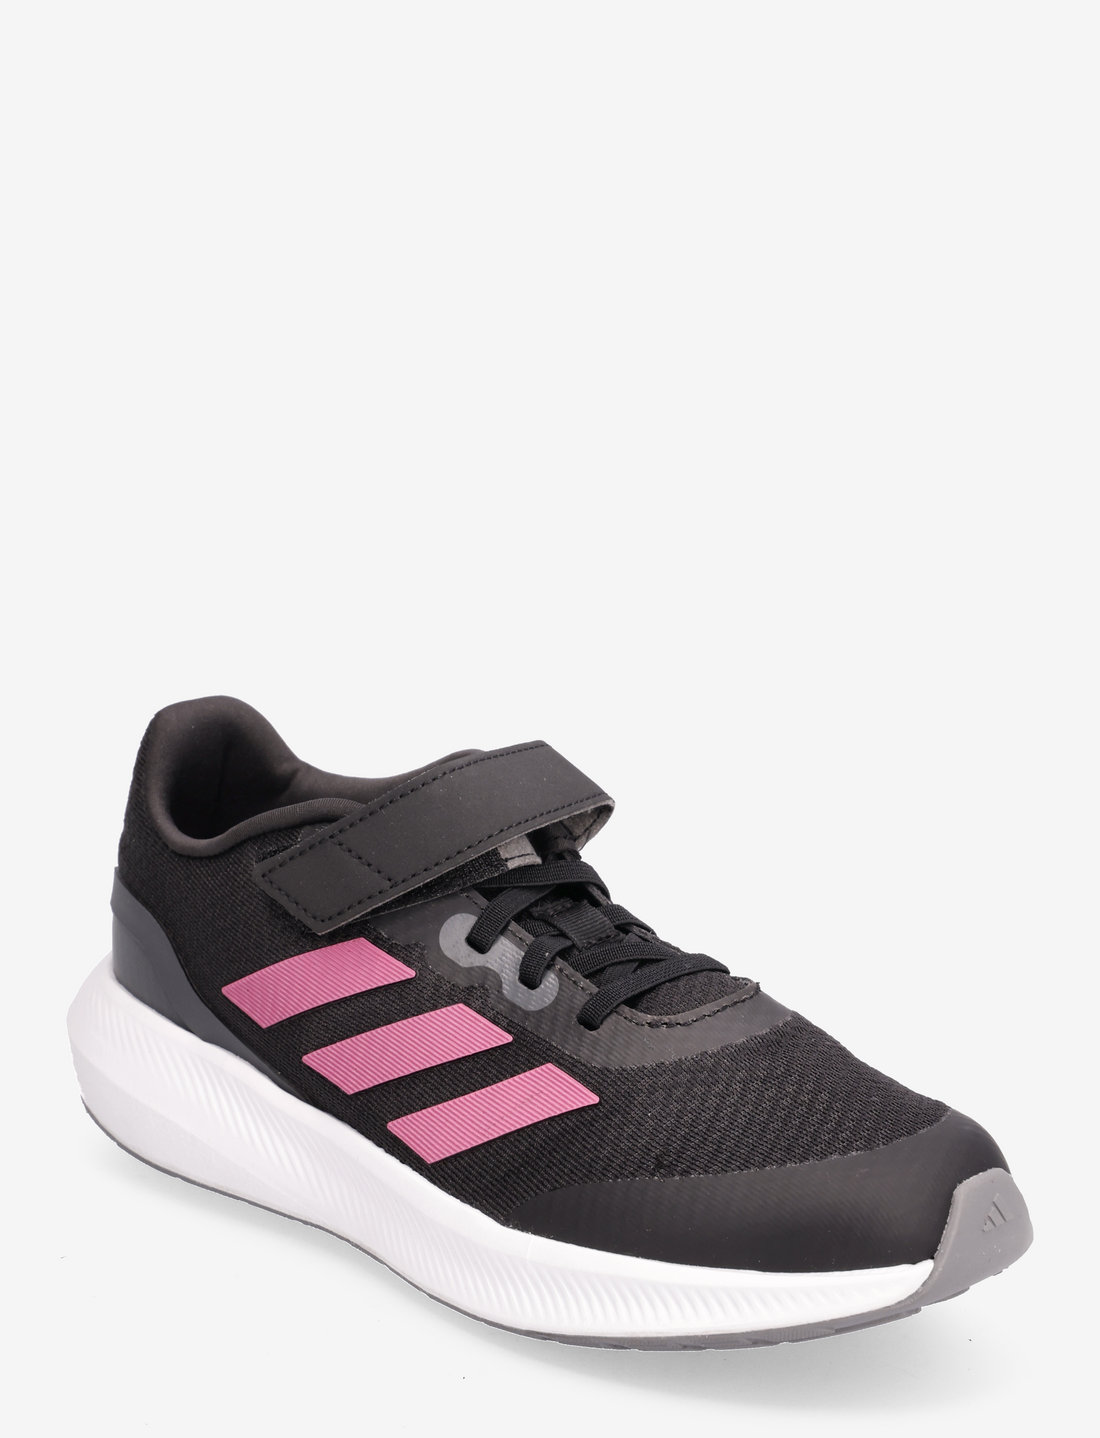 adidas Sportswear Runfalcon 3.0 Elastic Lace Top Strap Shoes - Low Tops